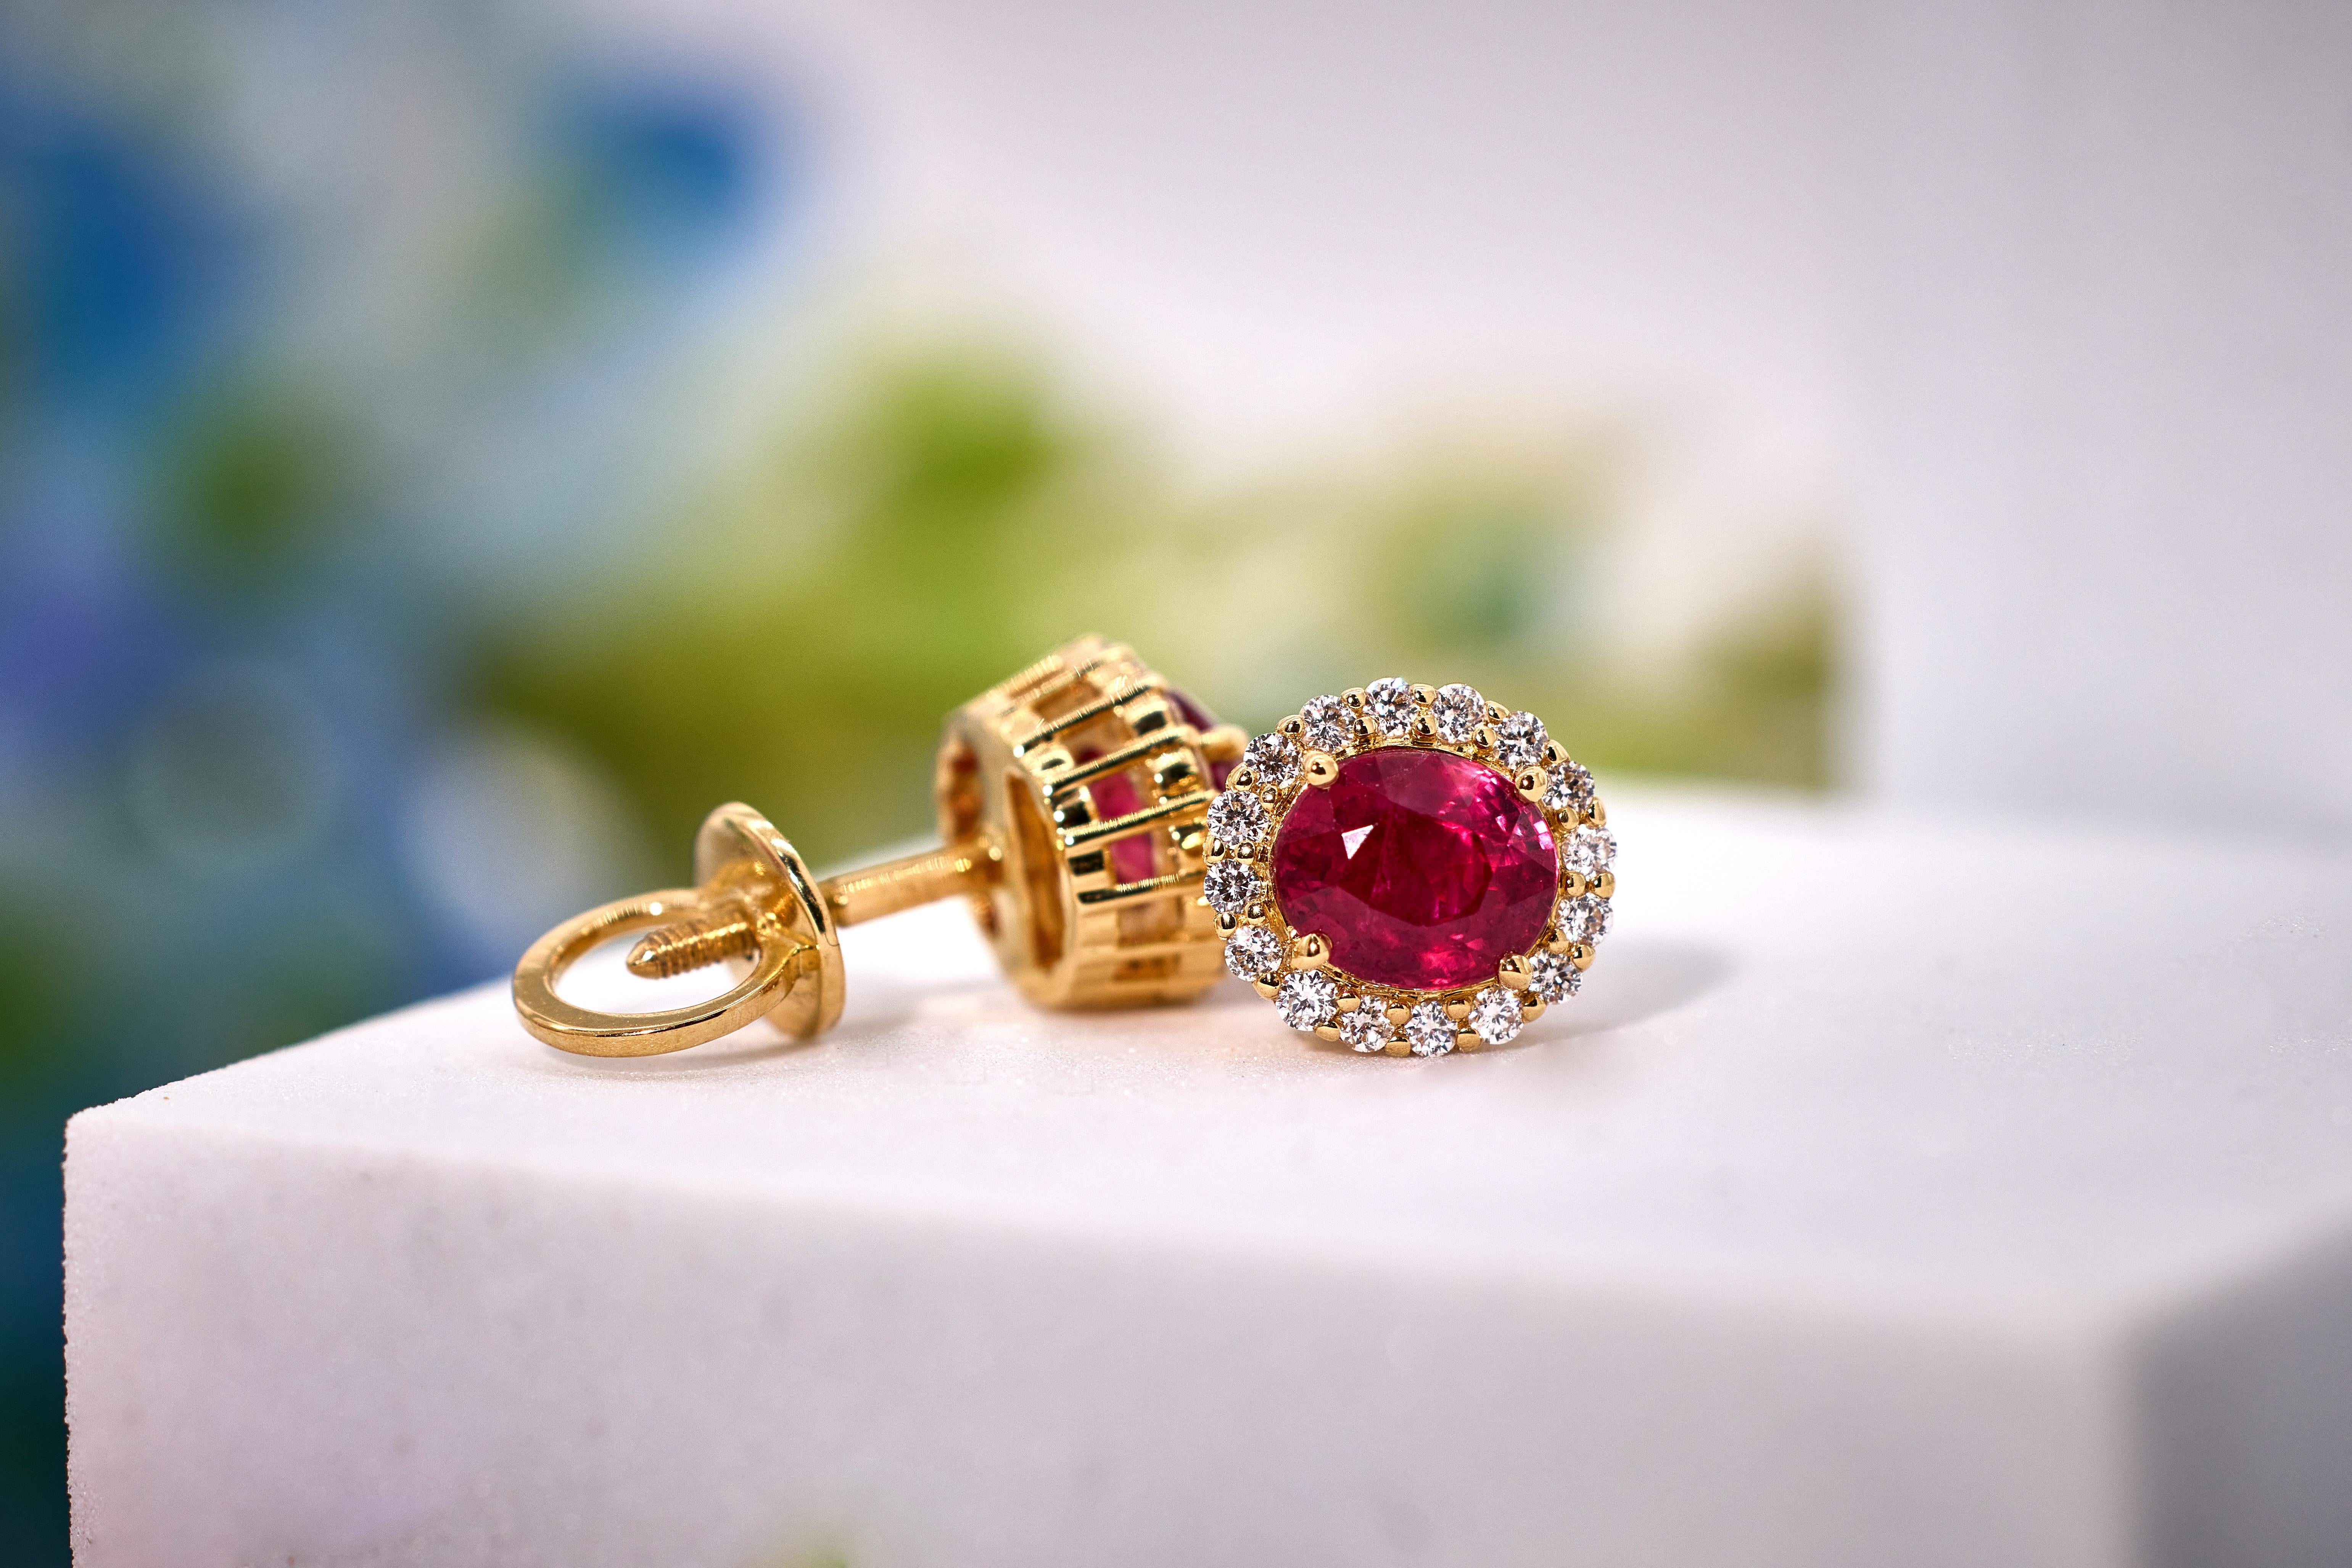 These earrings are made in house using fine Mozambique rubies. The total weight of rubies is 2.10 ct. Each Ruby is a little over 1.05 ct. Elegant and timeless designed earrings that are well made with attention to detail. Solid 18k gold Jewellery.